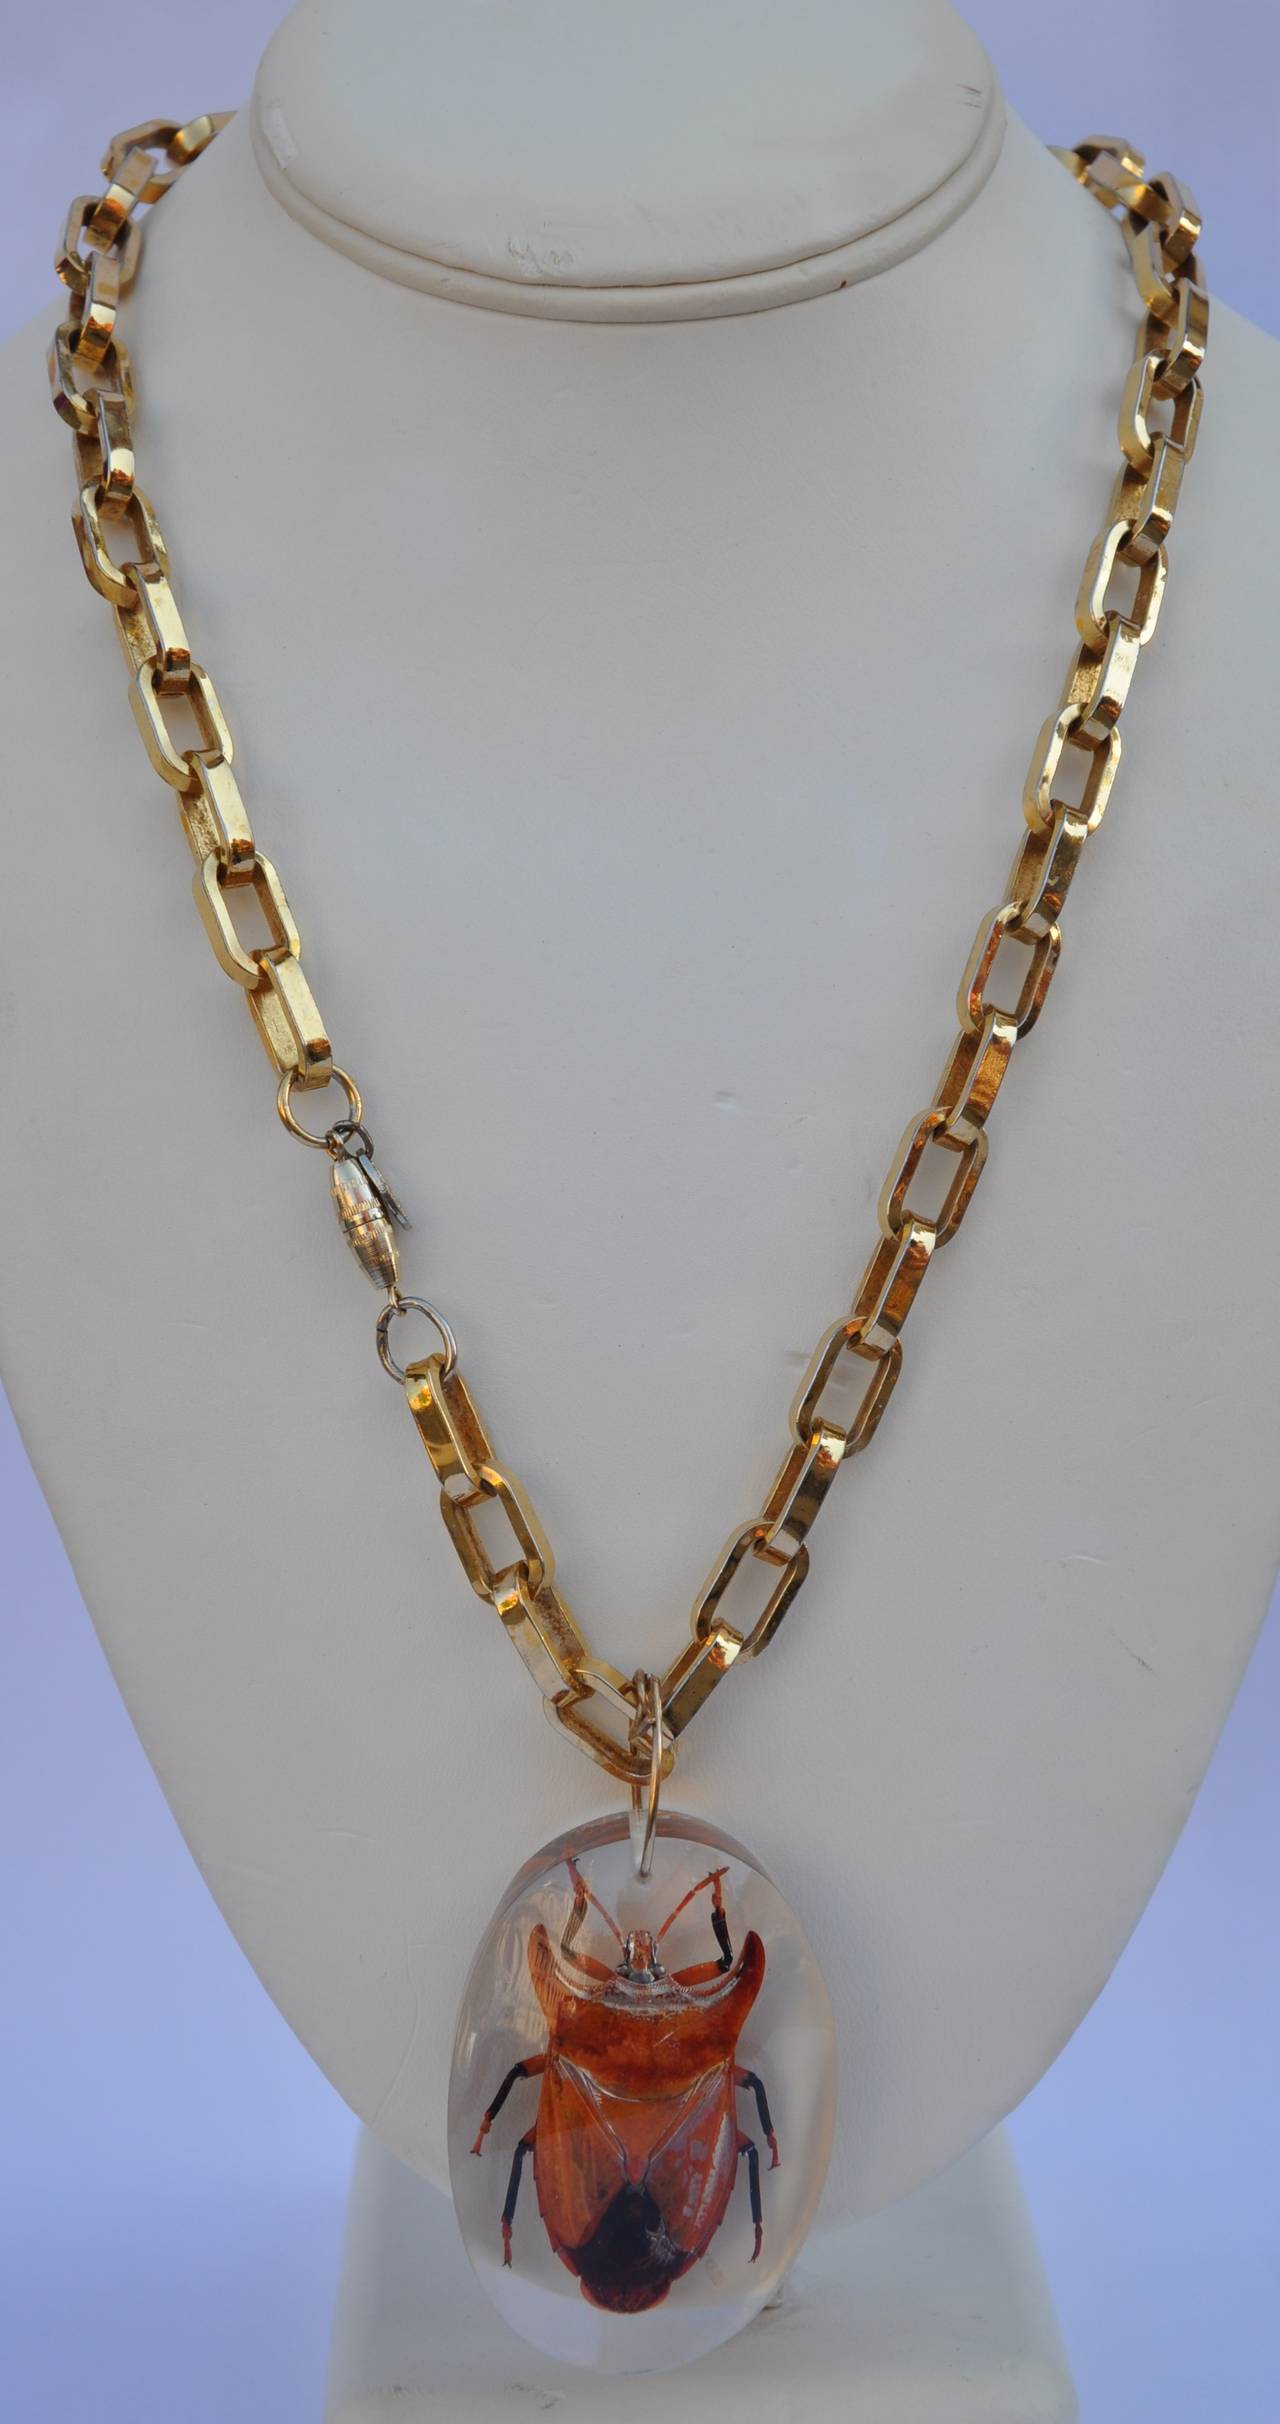         Vendome's  wonderfully wicked thick gilded gold-link chain necklace is accented with a large amber-hue globe as well as a huge lucite-covered fossilized "Bug" pendant.
         The gilded gold necklace measures 30" in length,